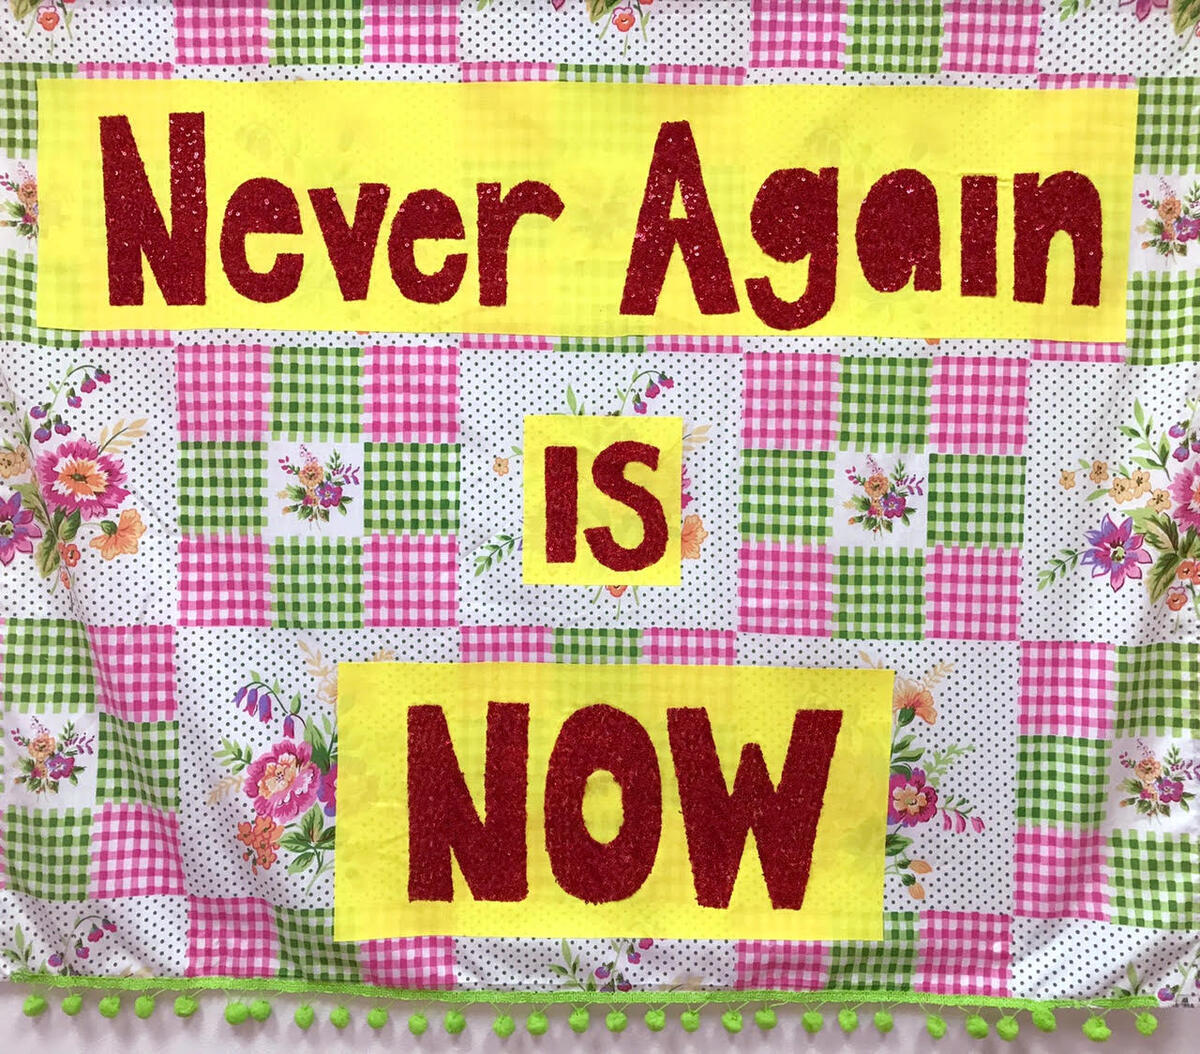 Flowery quilt featuring the words: "Never again is NOW"